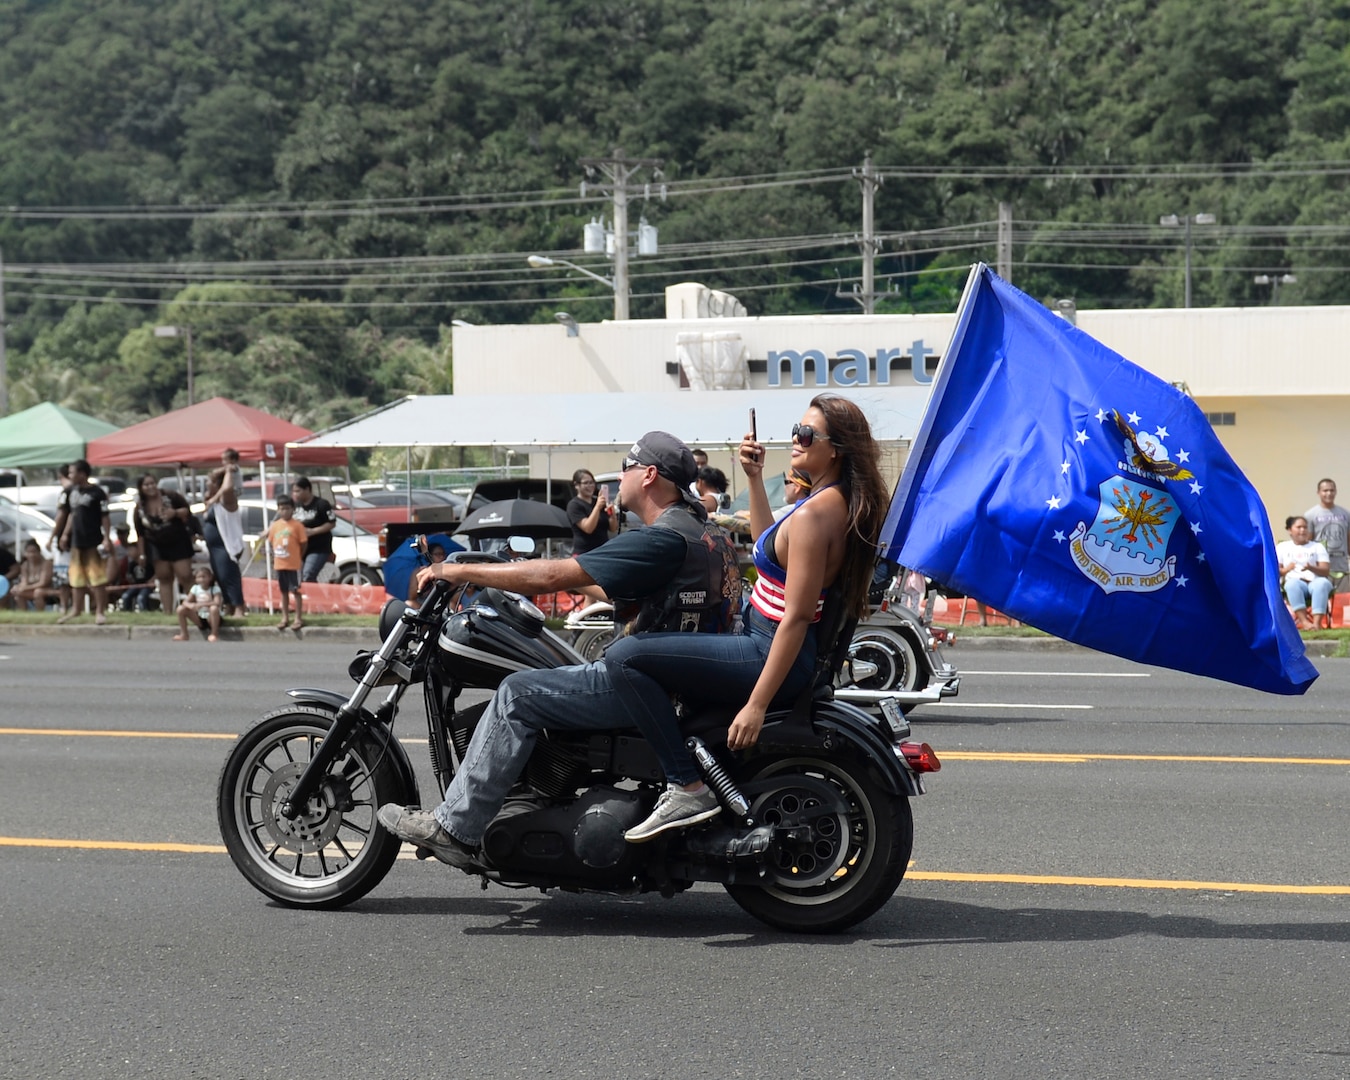 U.S Service members and local citizens participate in the 73rd Guam Liberation Day parade July 21, 2017, in Hagåtña, Guam. Liberation Day is celebrated every year on July 21 to mark the day Guam was liberated by U.S. armed forces from Japanese occupation during World War II. (U.S. Air Force photo by Airman 1st Class Gerald R. Willis)